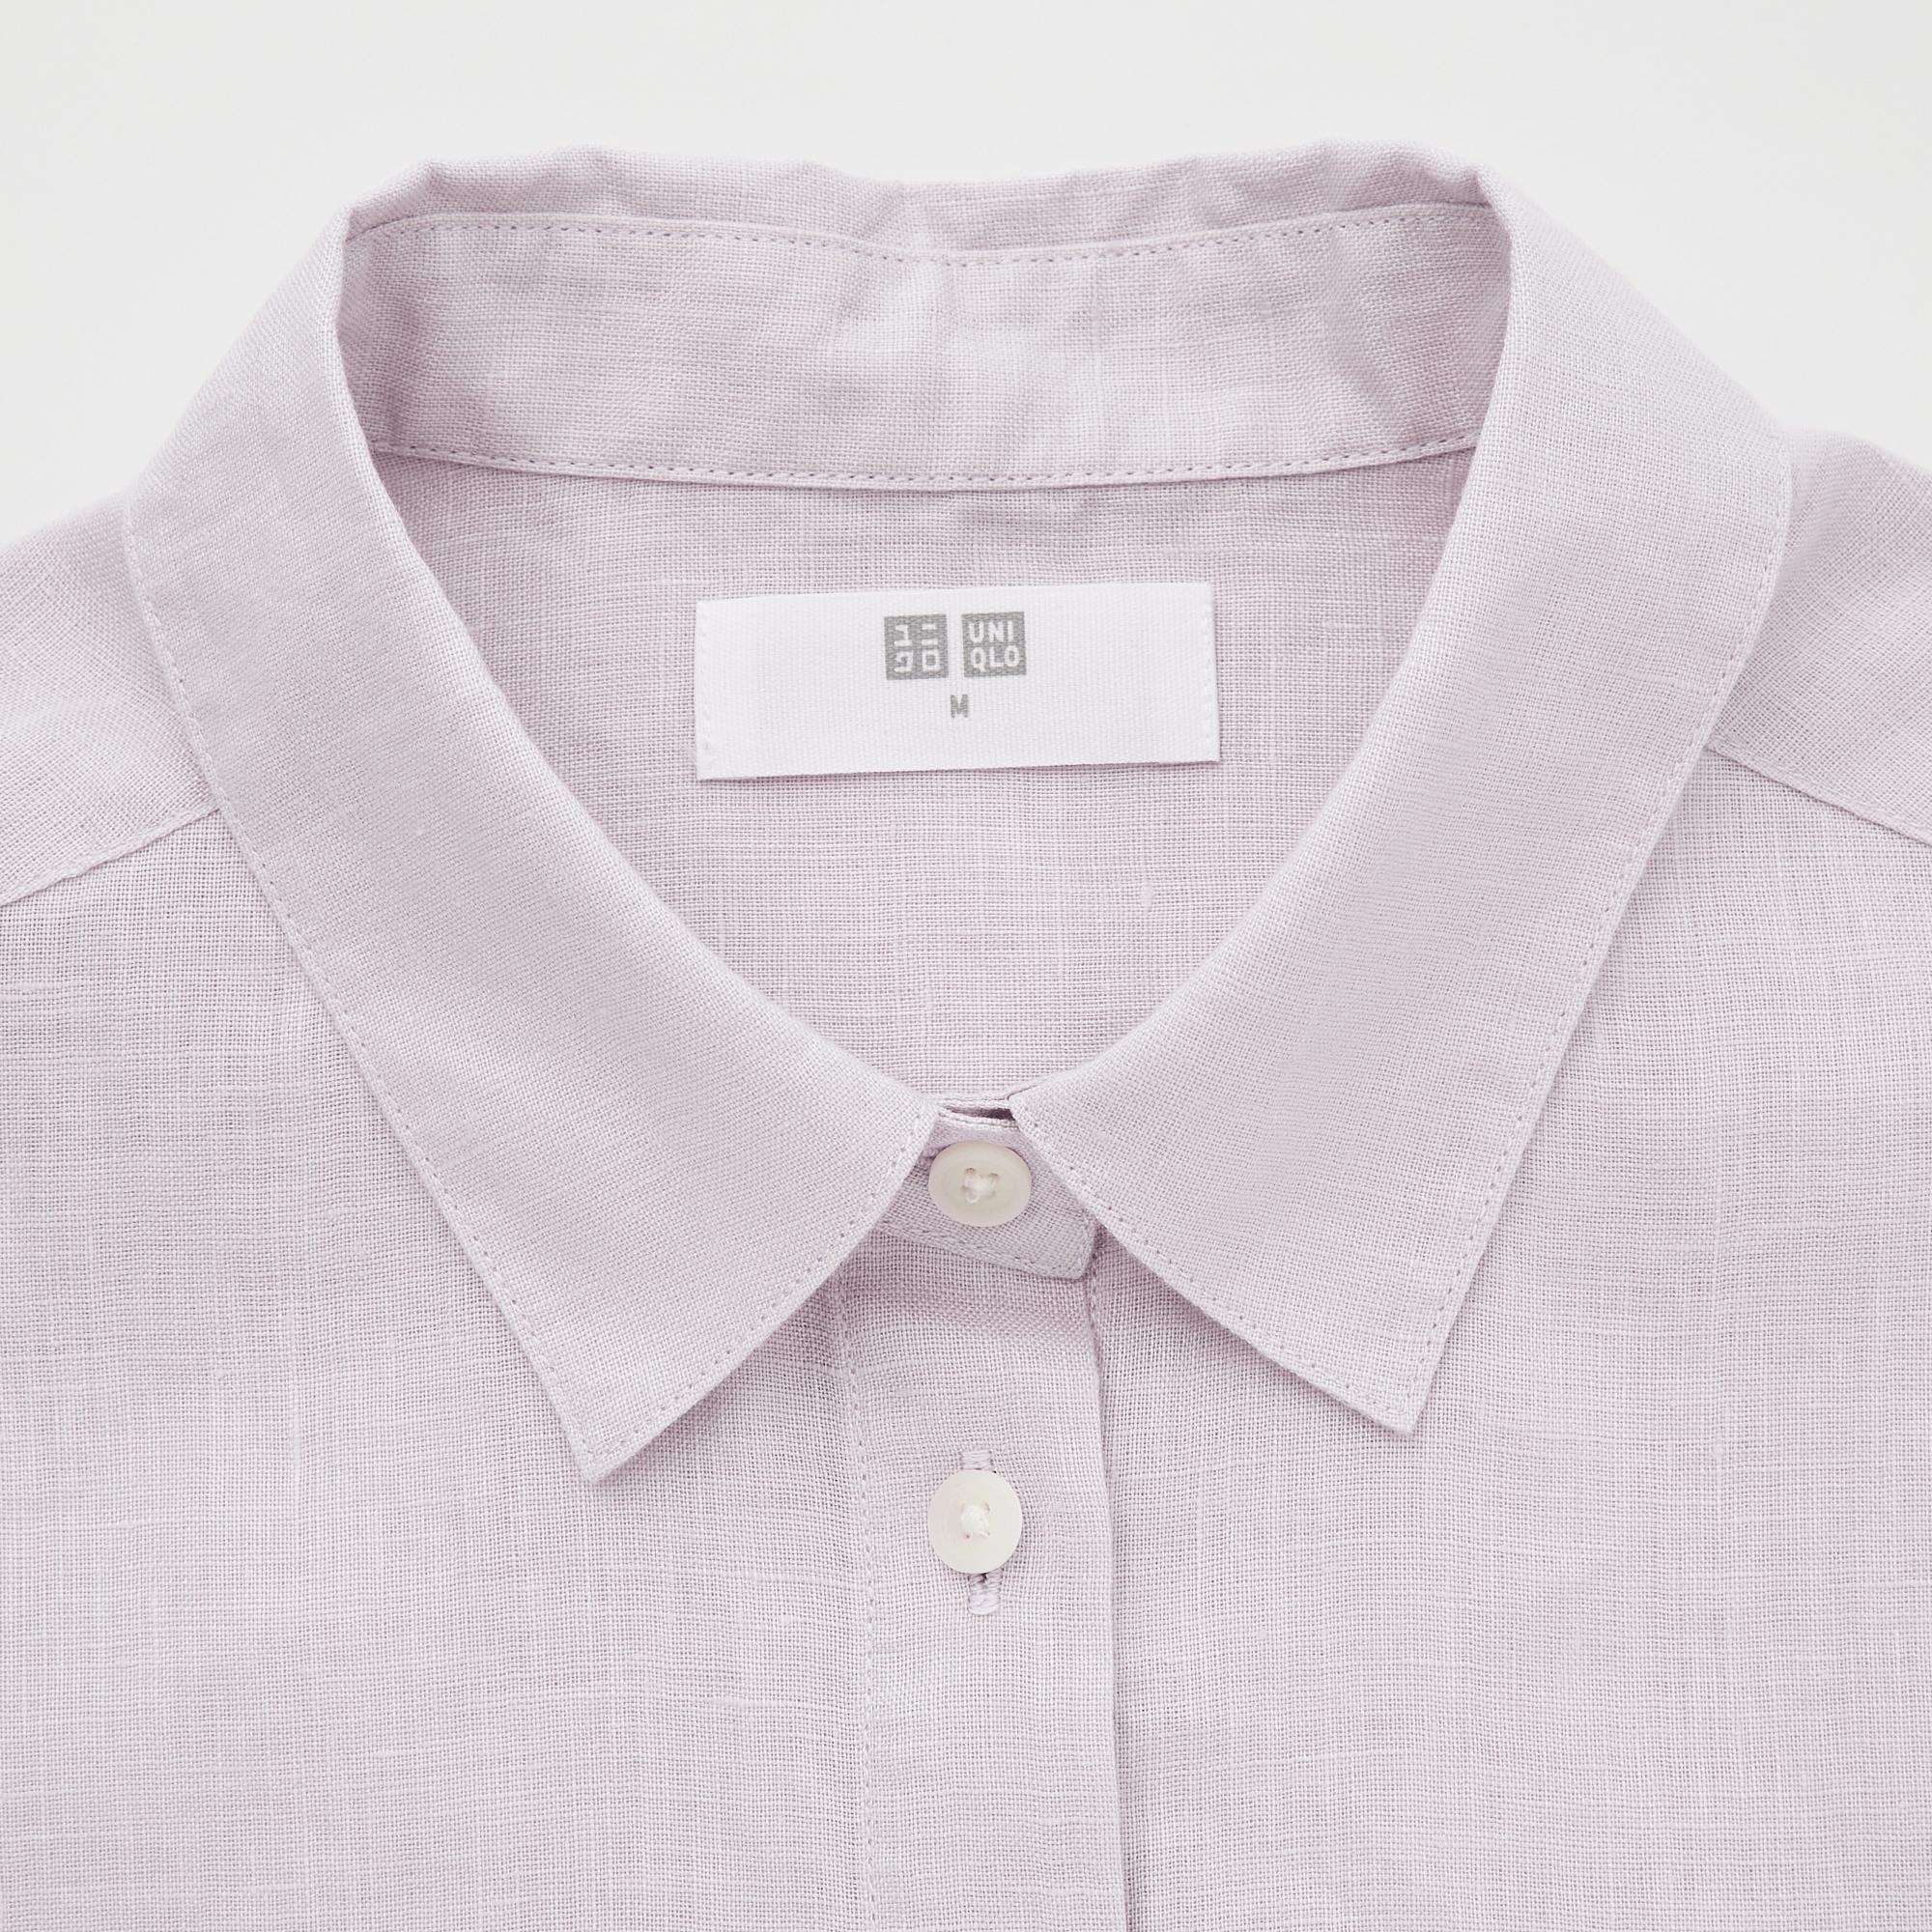 Uniqlo Singapore  Made of 100 natural fabric the Premium Linen  Sleeveless Shirt provides comfort with its absorbent and breathable  functions Find out more at httpssuniqlocom2MDY12v  Facebook